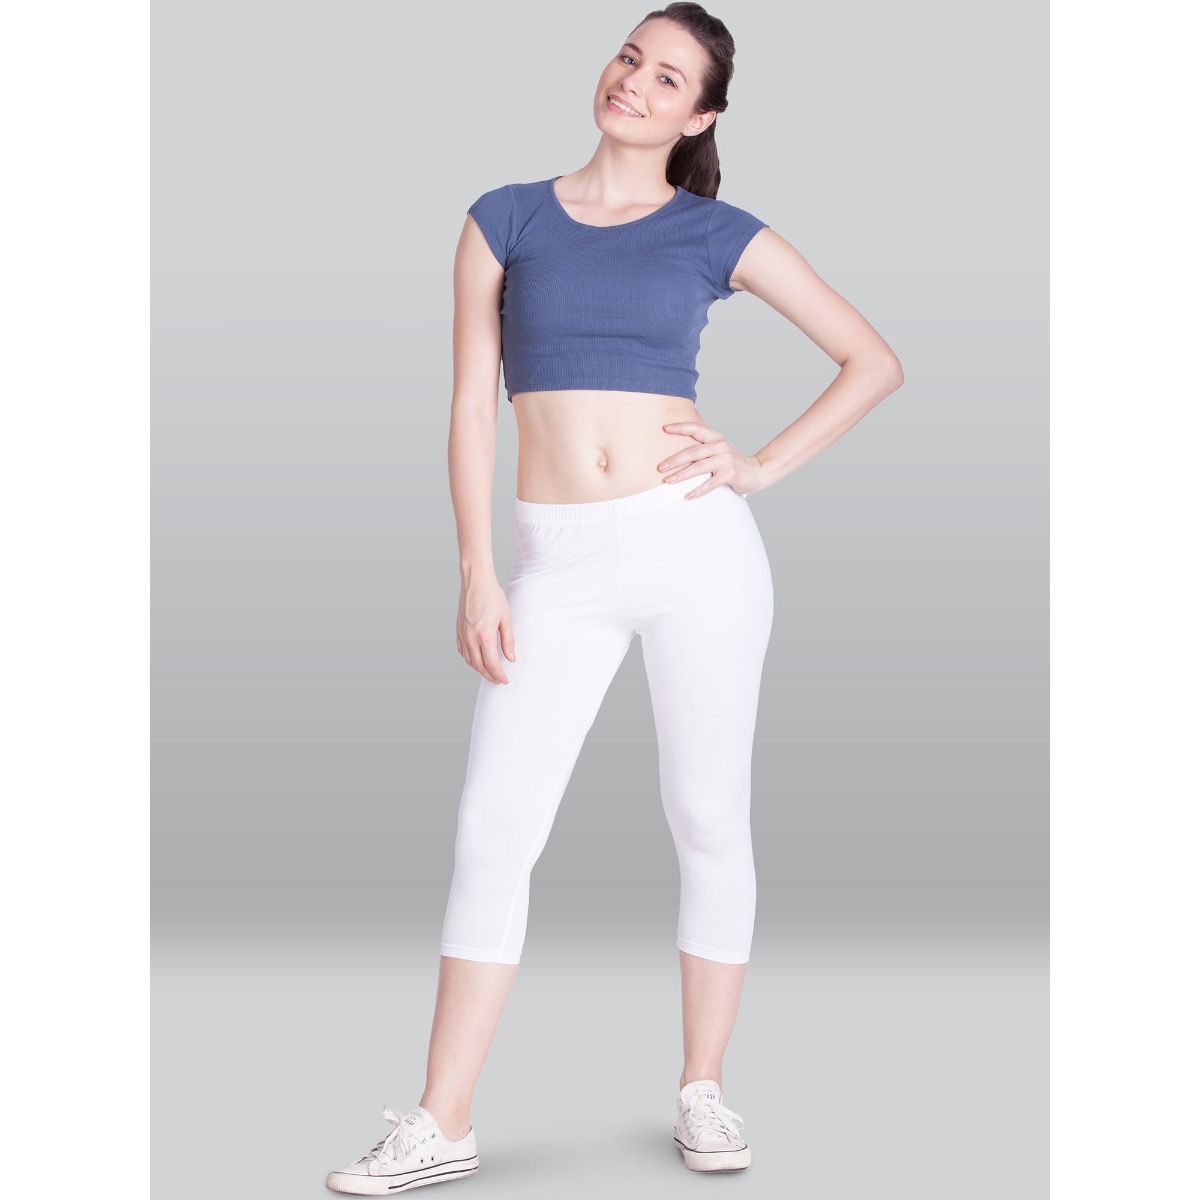 Buy NP CREATION Exclusive Plain Cotton Lycra Ankle Length Leggings Black &  White Combo Free Size at Amazon.in